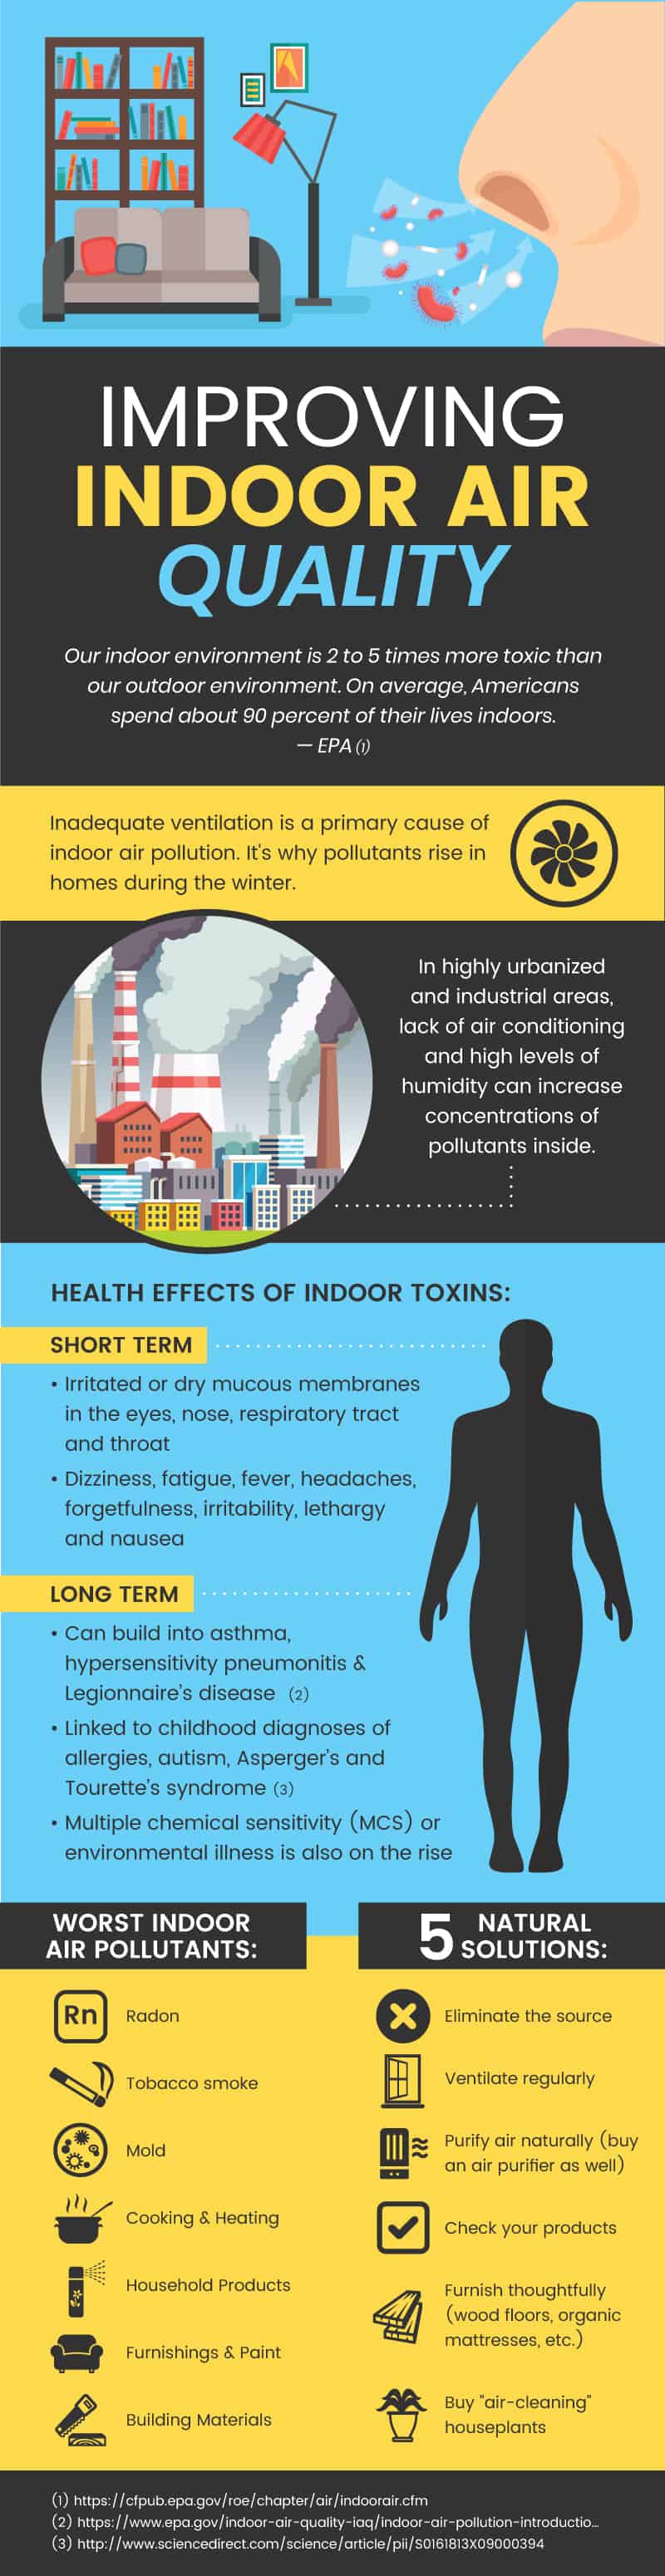 Guide to indoor air quality - Dr. Axe